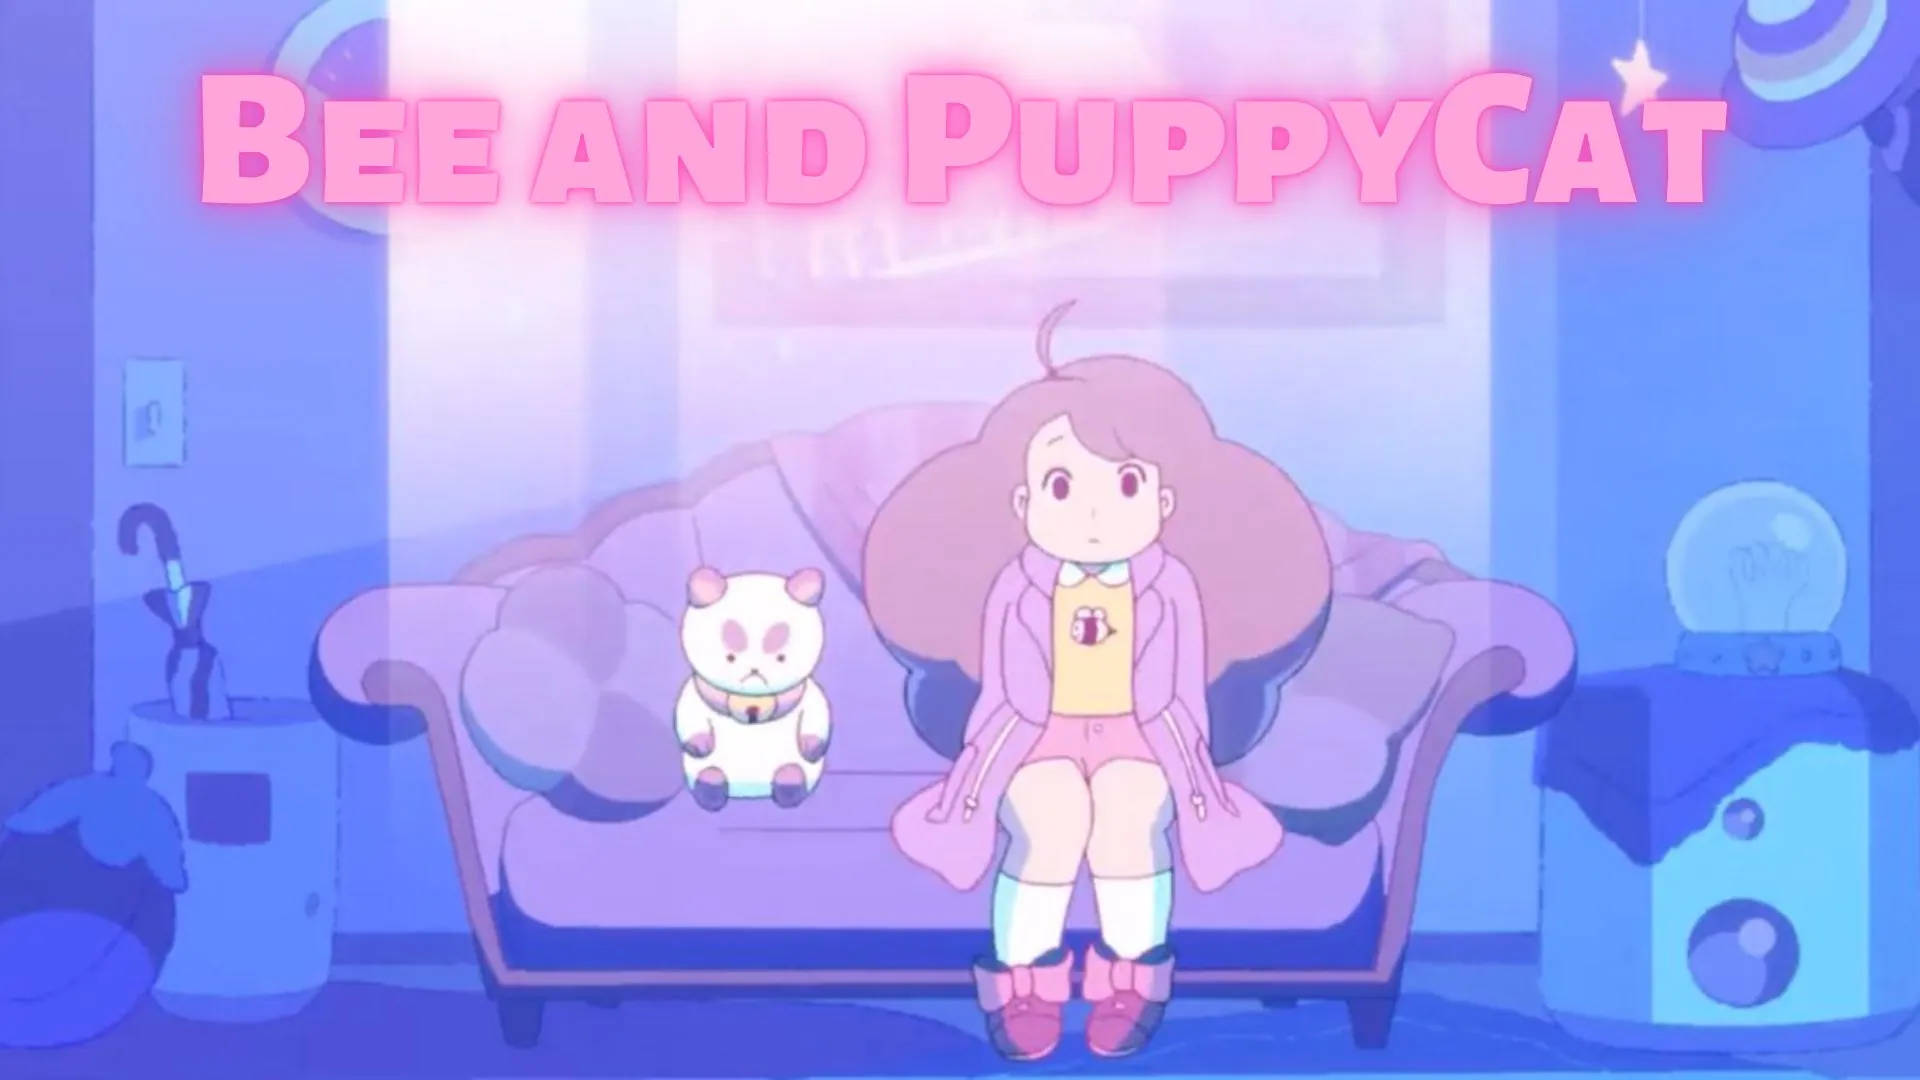 Another Puppycat wallpaper I was thinking of